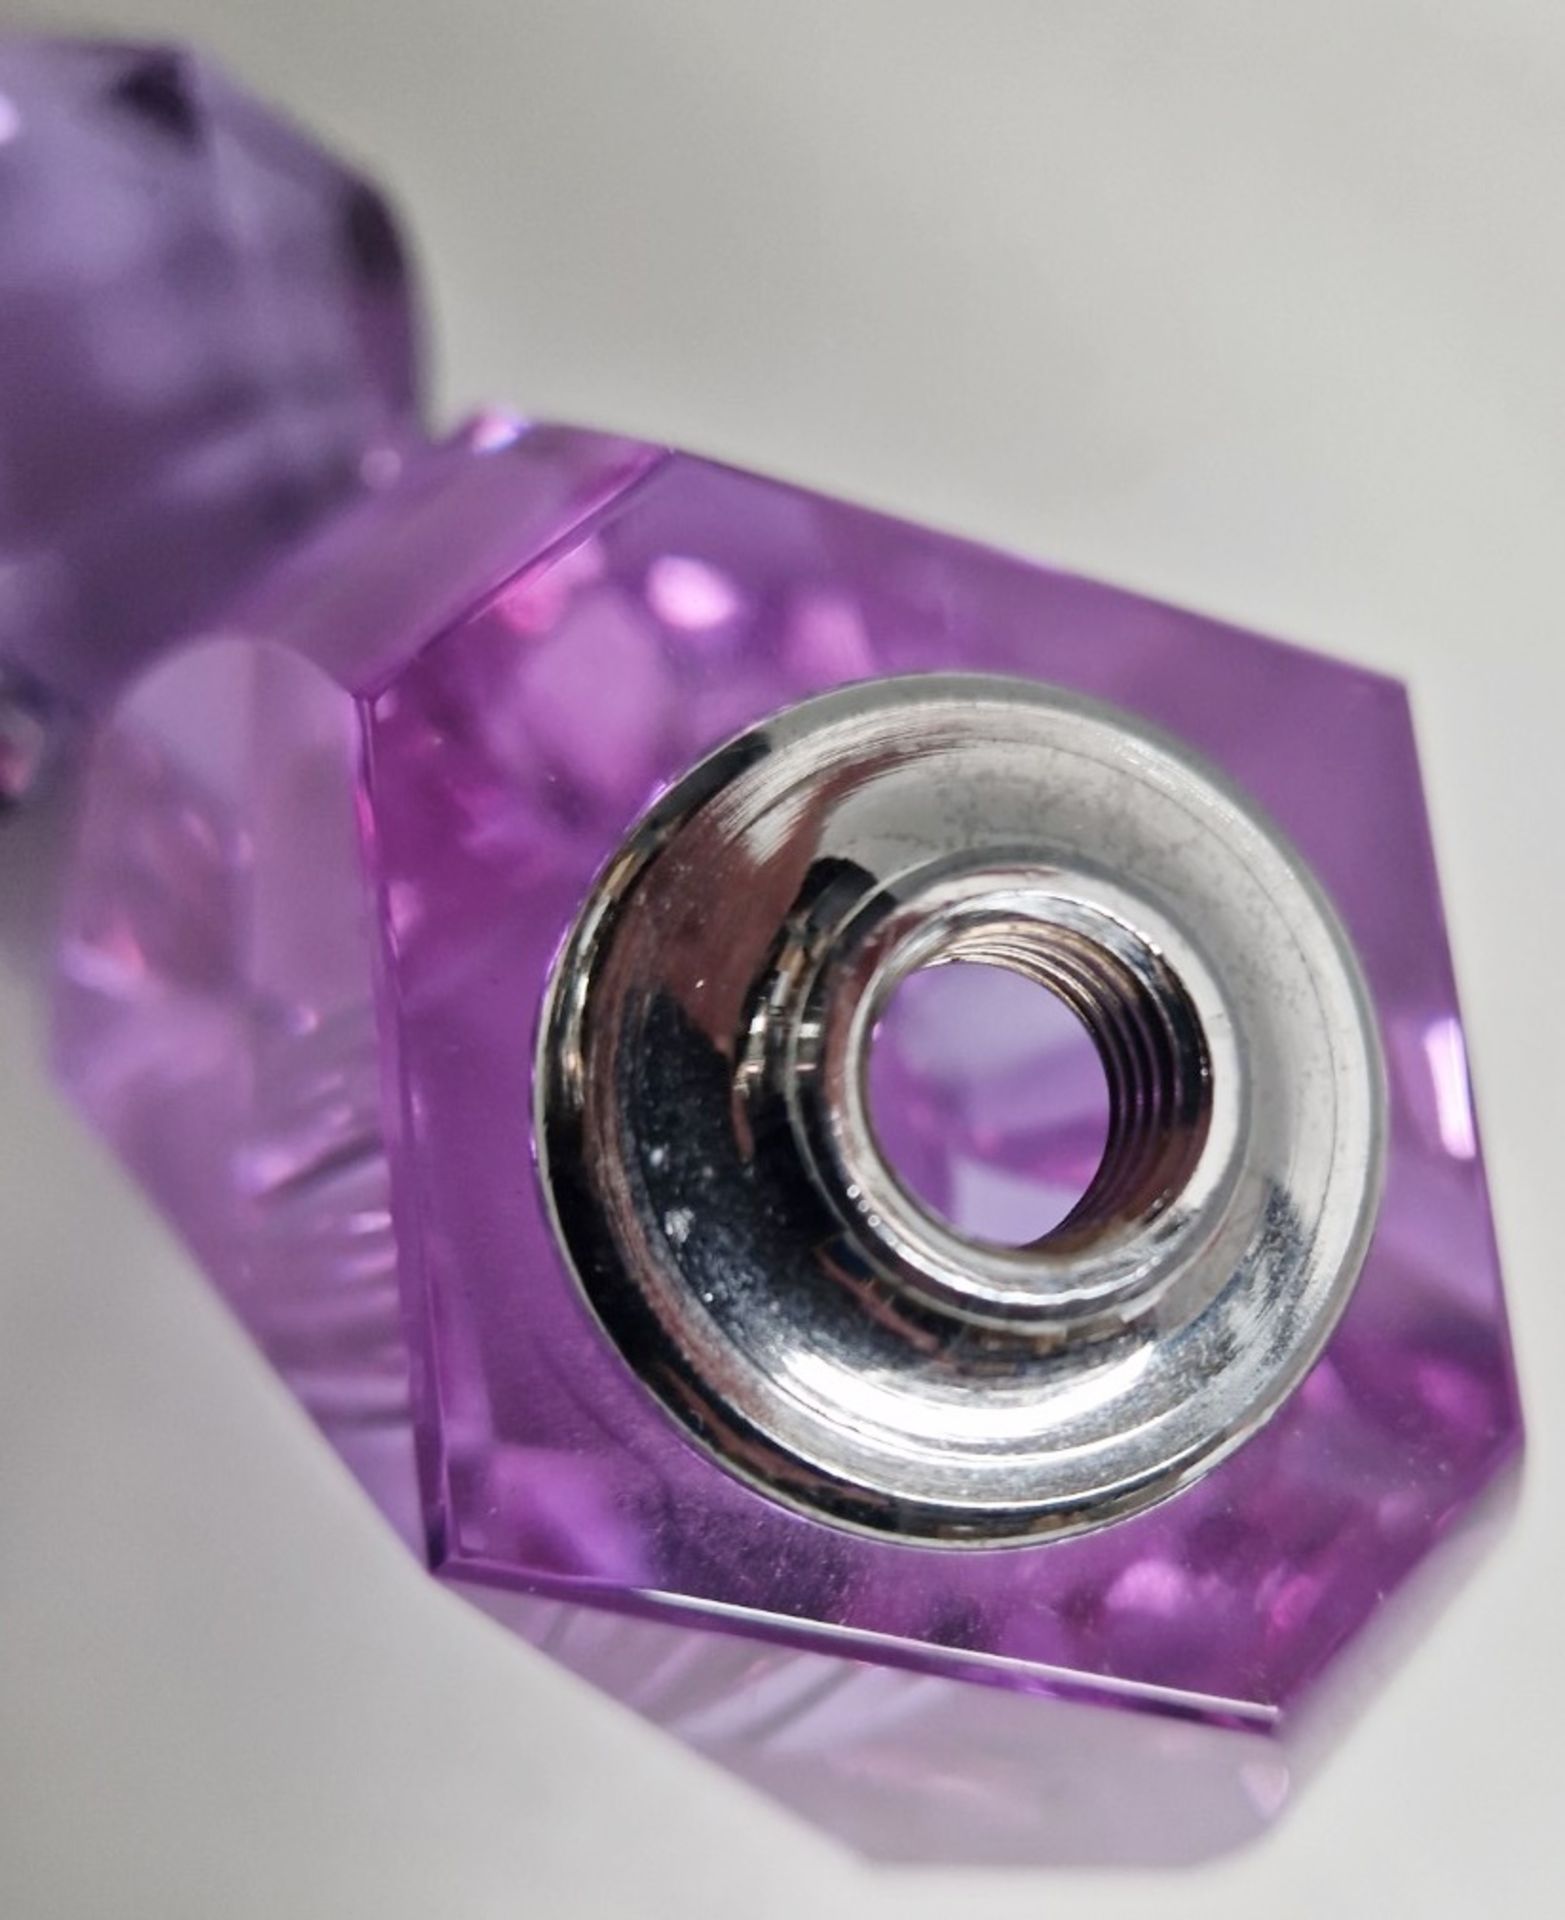 1 x Beautiful Purple Crystal Glass Perfume Bottle With Dauber And Threaded Stopper - Image 2 of 6